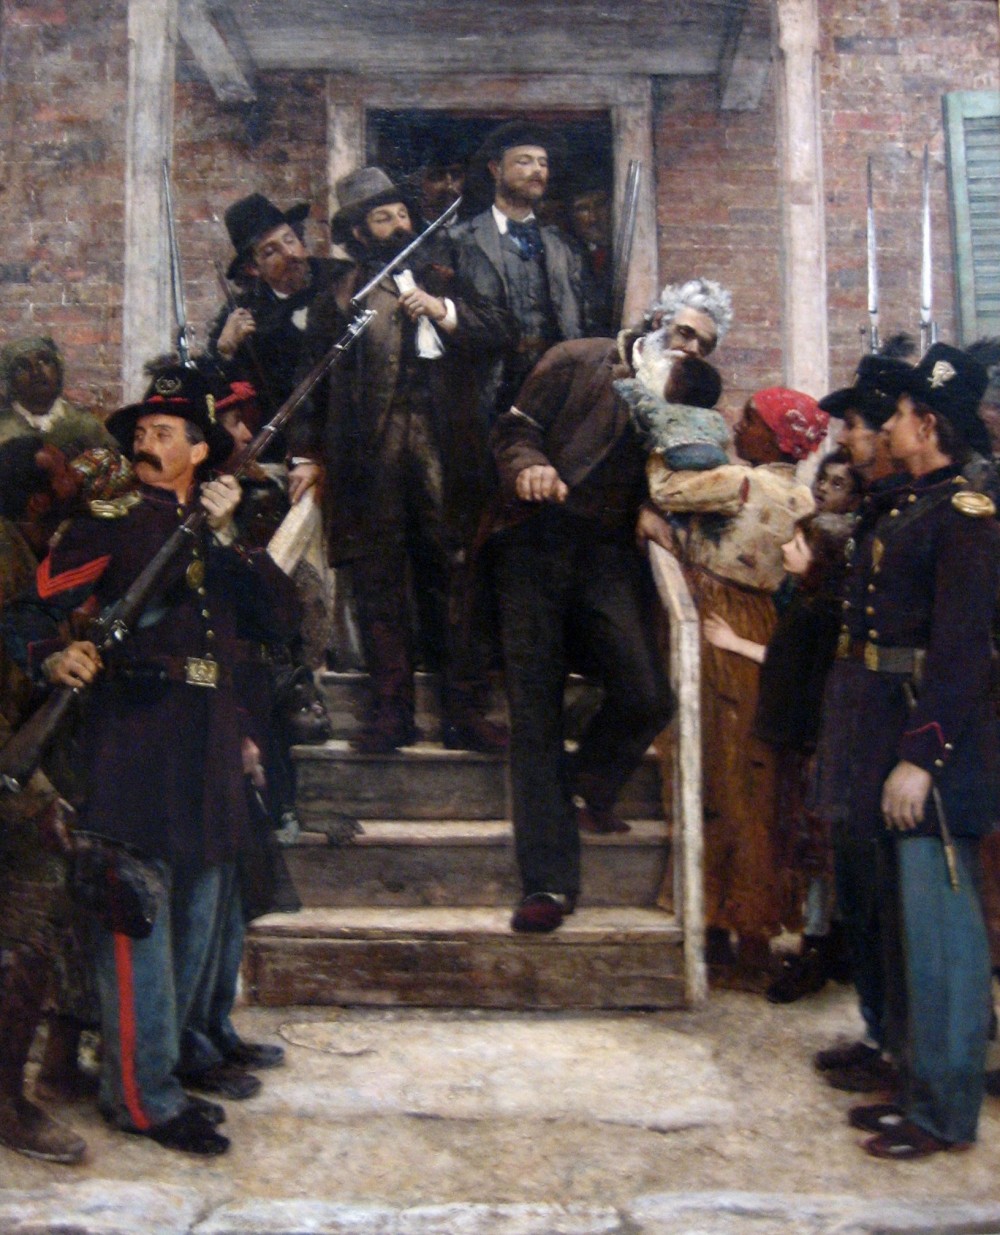 The execution of John Brown made him a martyr in abolitionist circles and a confirmed traitor in southern crowds. Both of these images continued to pervade public memory after the Civil War, but in the North especially (where so many soldiers had died to help end slavery) his name was admired. Over two decades after Brown’s death, Thomas Hovenden portrayed Brown as a saint. As he is lead to his execution for attempting to destroy slavery, Brown poignantly leans over a rail to kiss a black baby. Thomas Hovenden, The Last Moments of John Brown, c. 1882-1884. Wikimedia, http://commons.wikimedia.org/wiki/File:%27The_Last_Moments_of_John_Brown%27,_oil_on_canvas_painting_by_Thomas_Hovenden.jpg. 